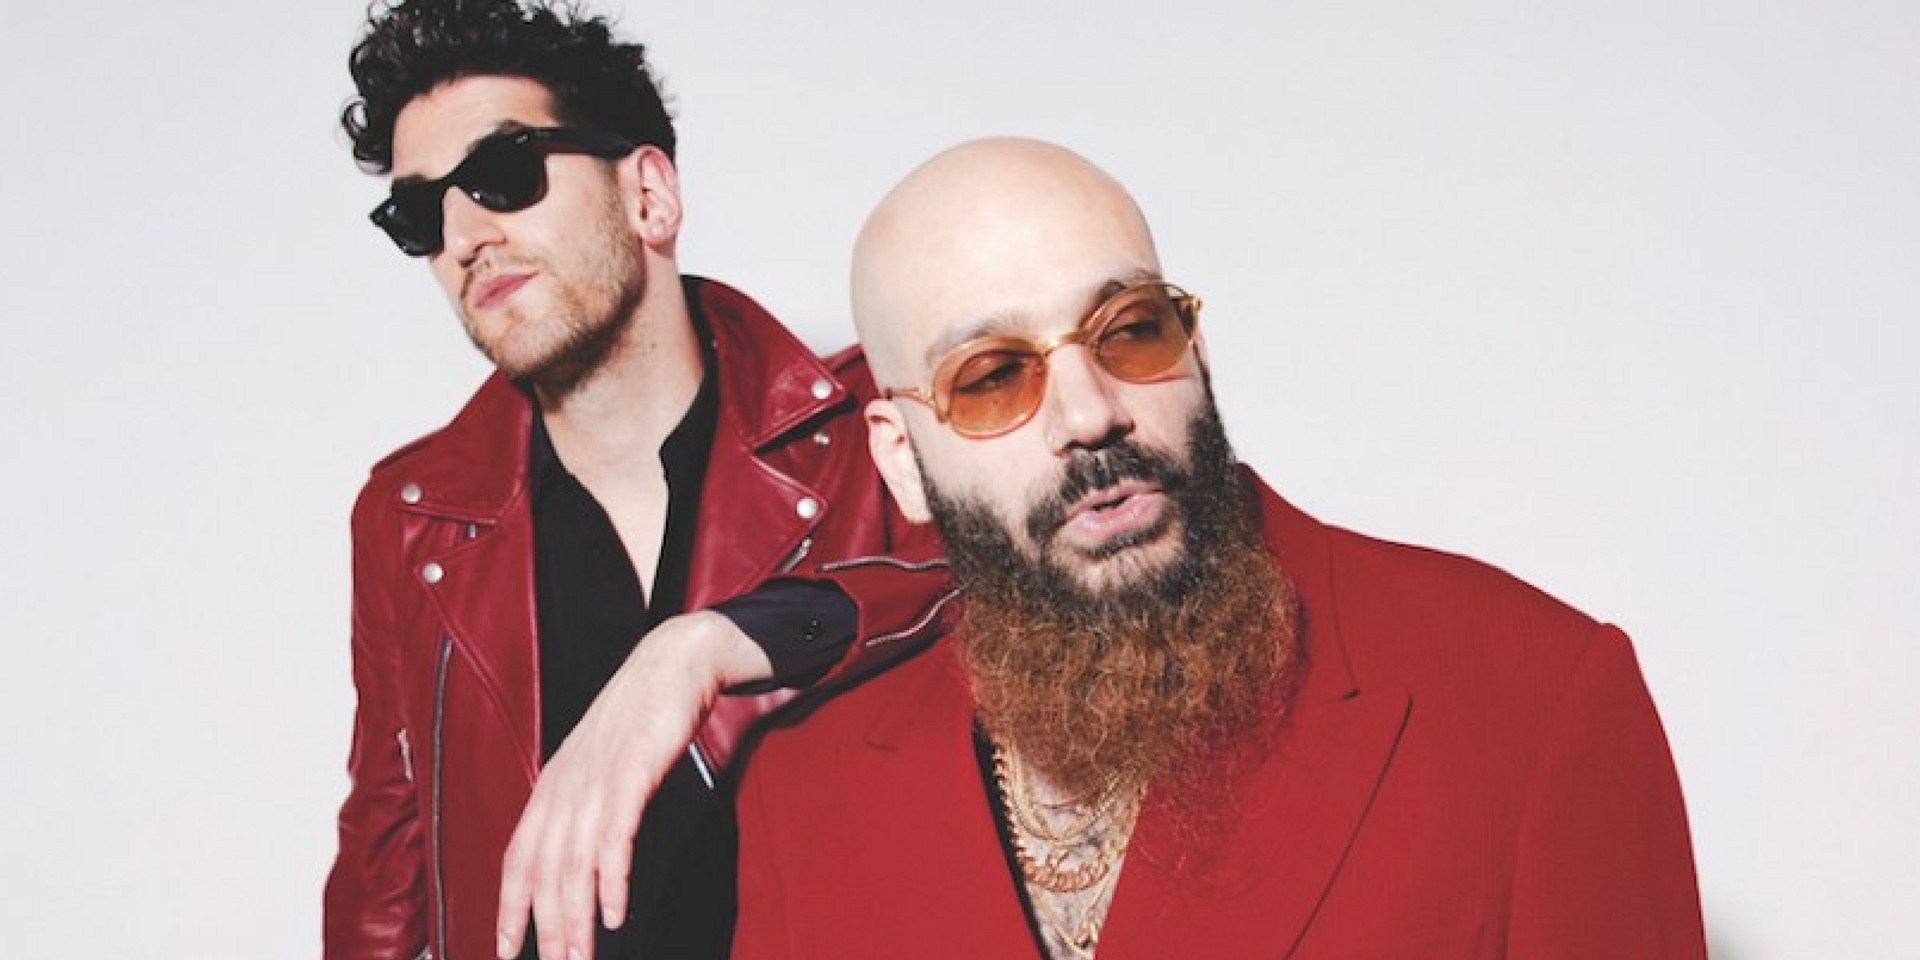 Collective Minds announces Southeast Asian Chromeo Tour – Singapore, Kuala Lumpur and more confirmed